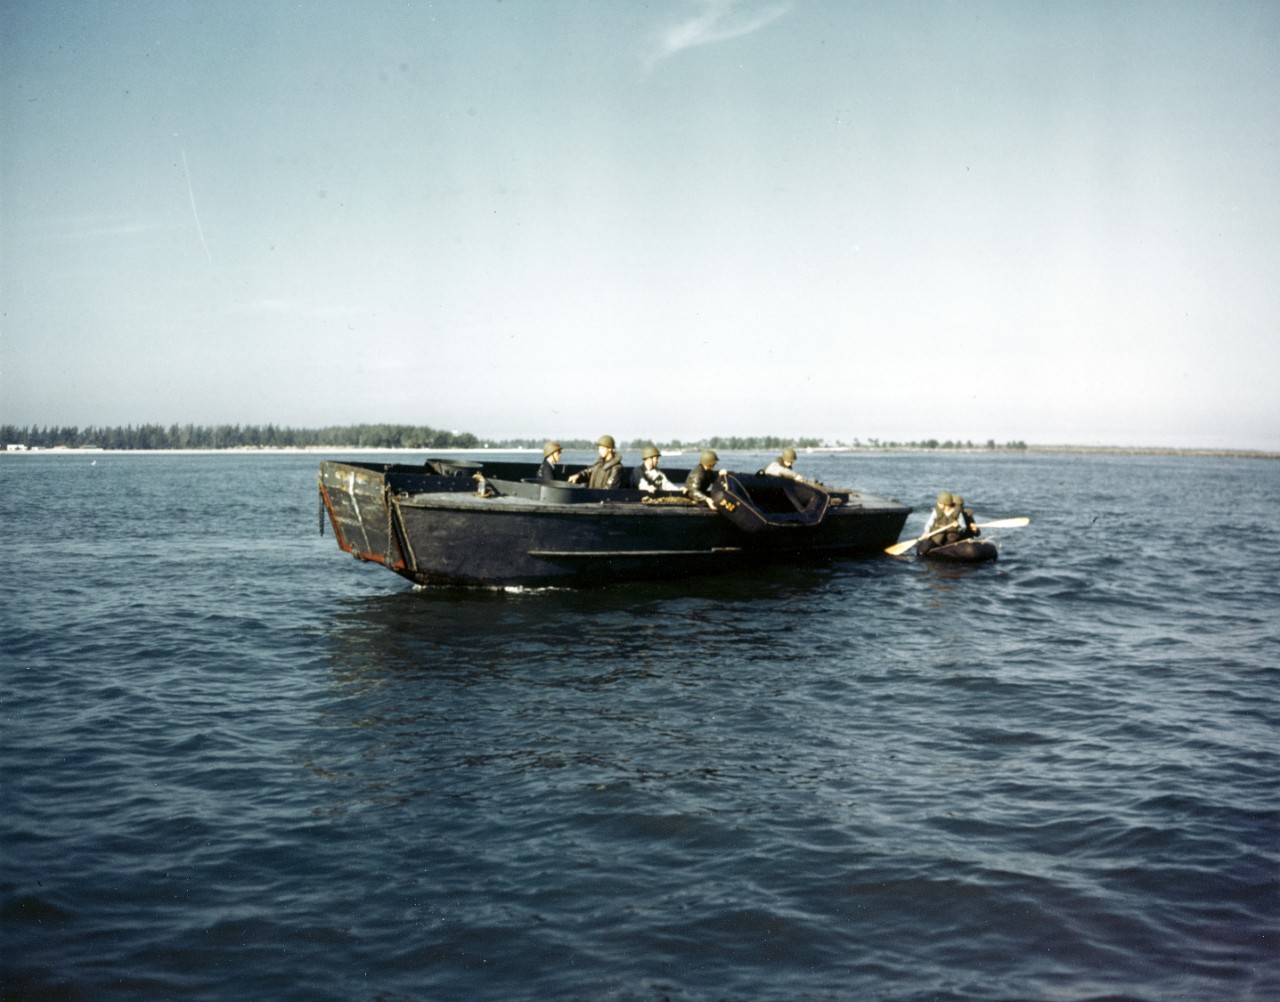 Rubber rafts are launched from a Navy LCPR landing craft, for trainees to paddle ashore to the objective, during World War II.